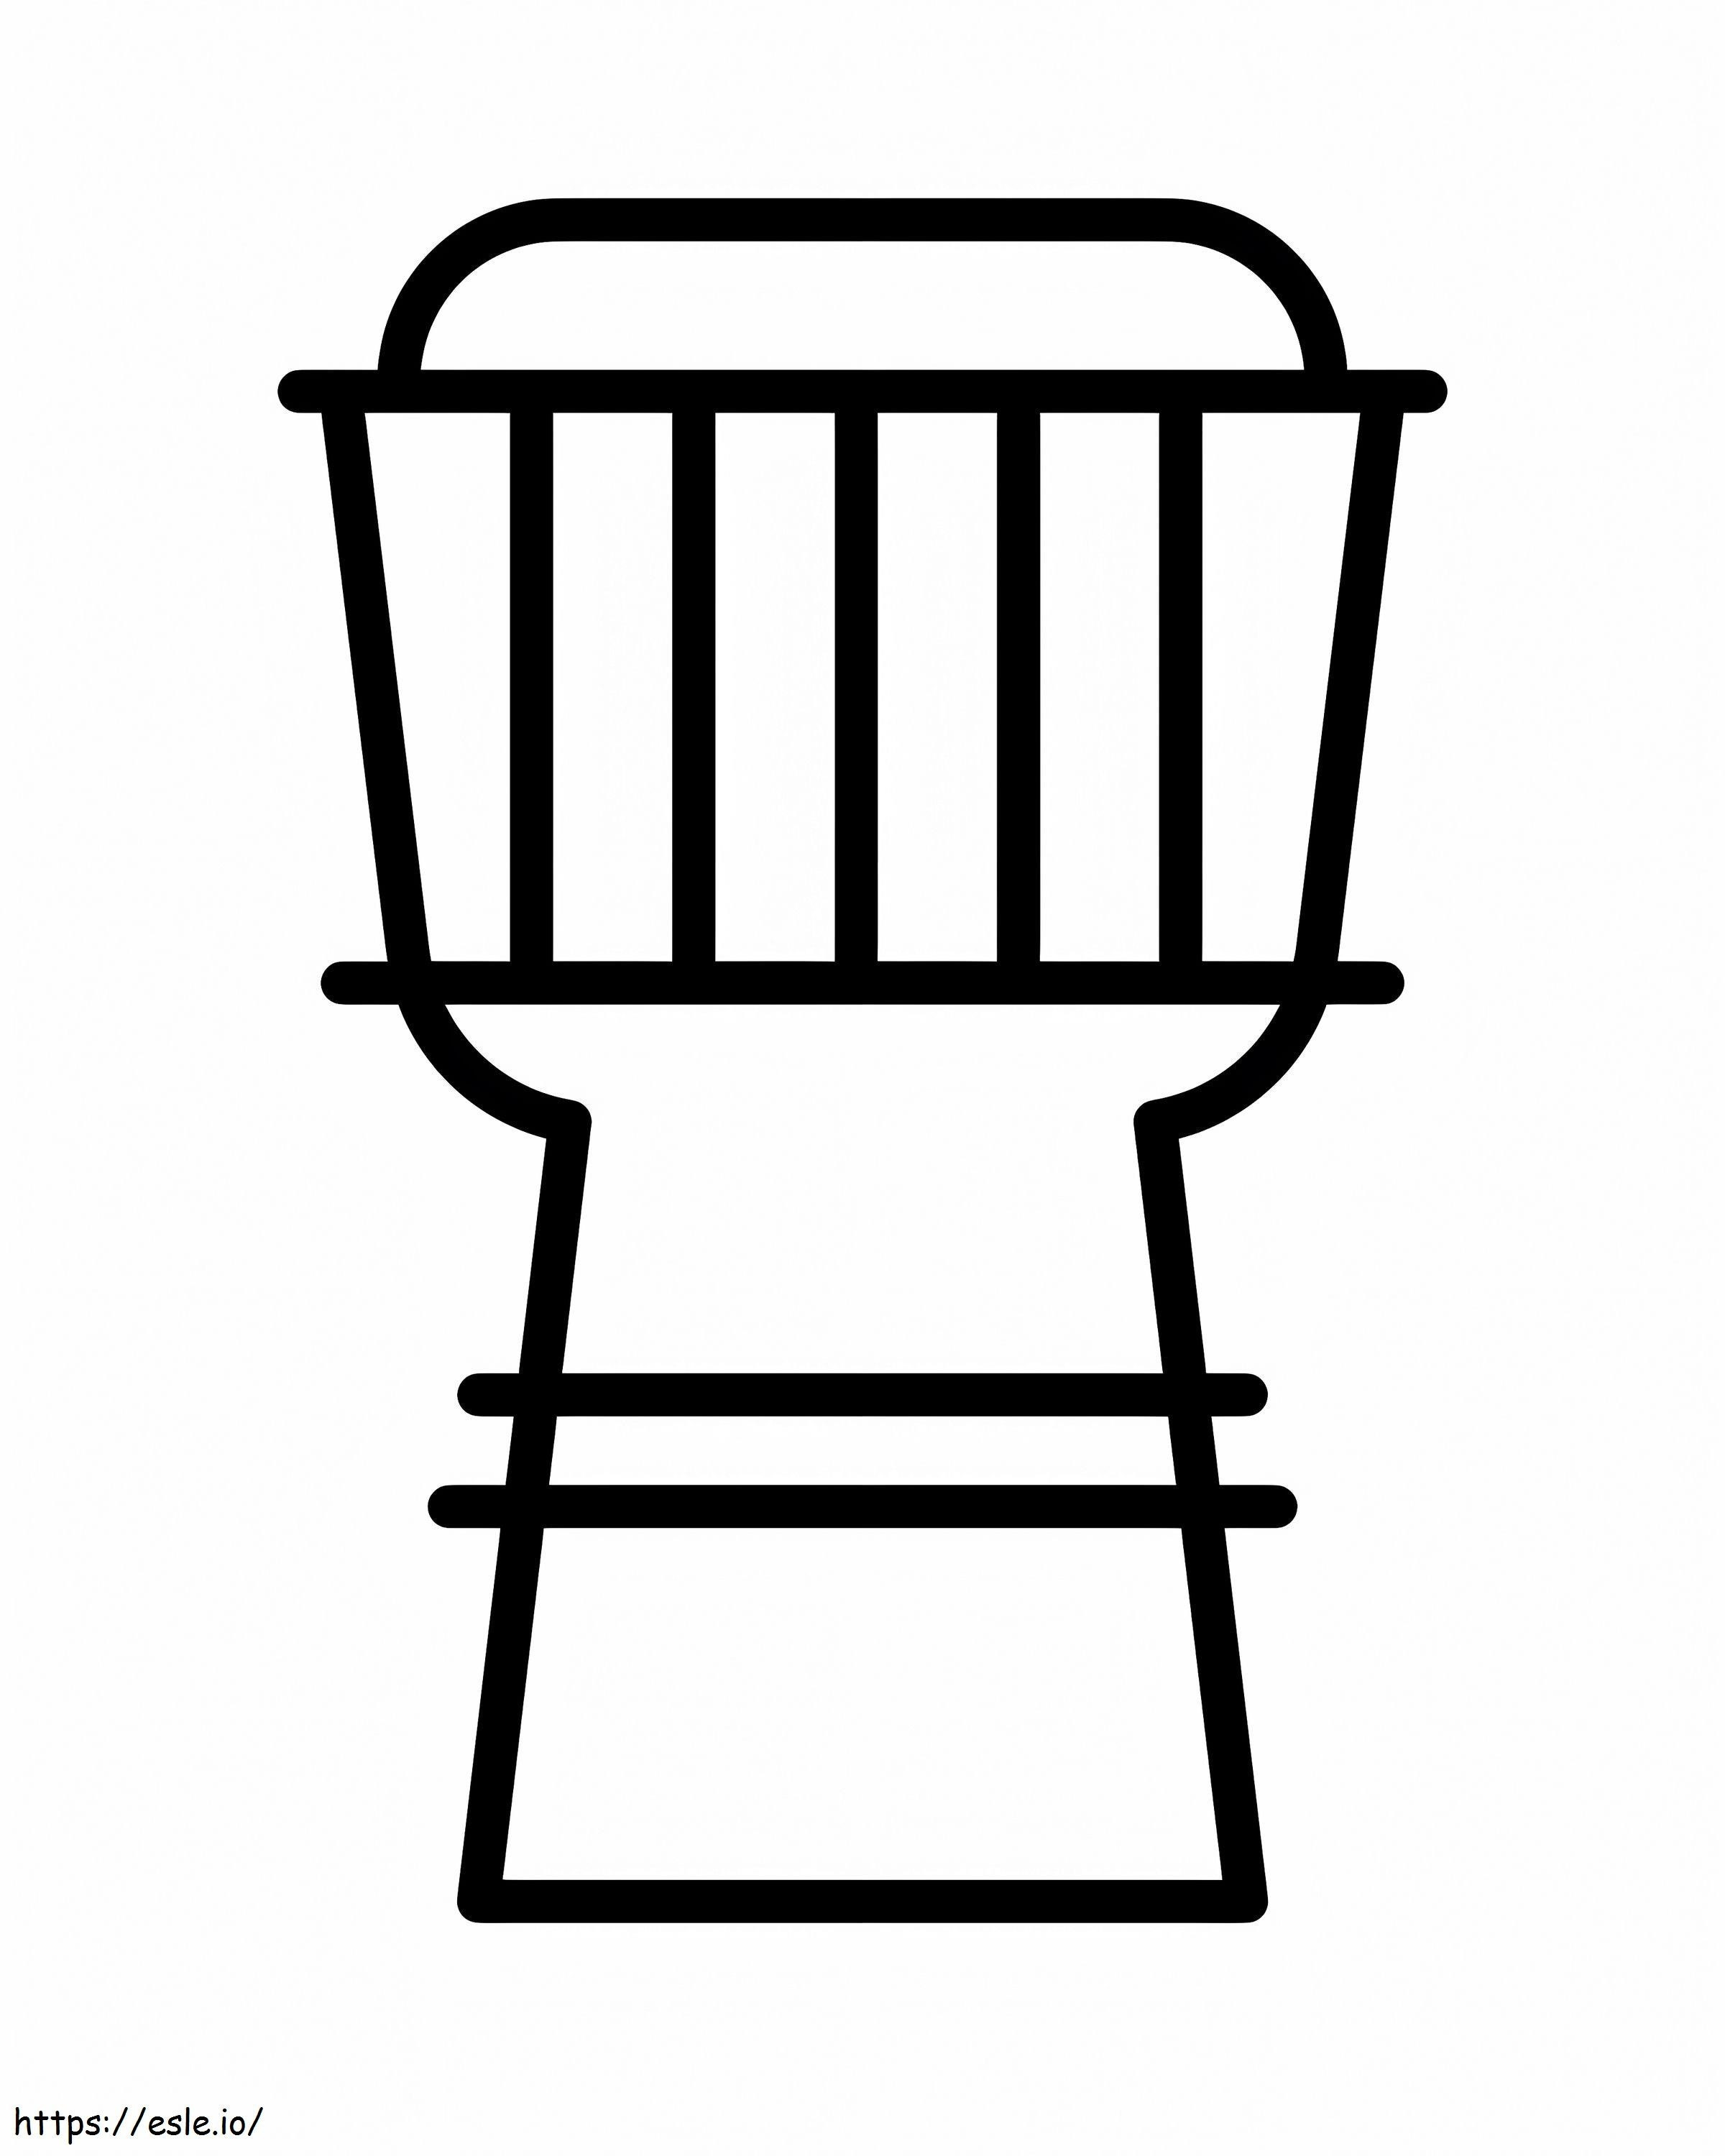 Simple Drum Djembe coloring page